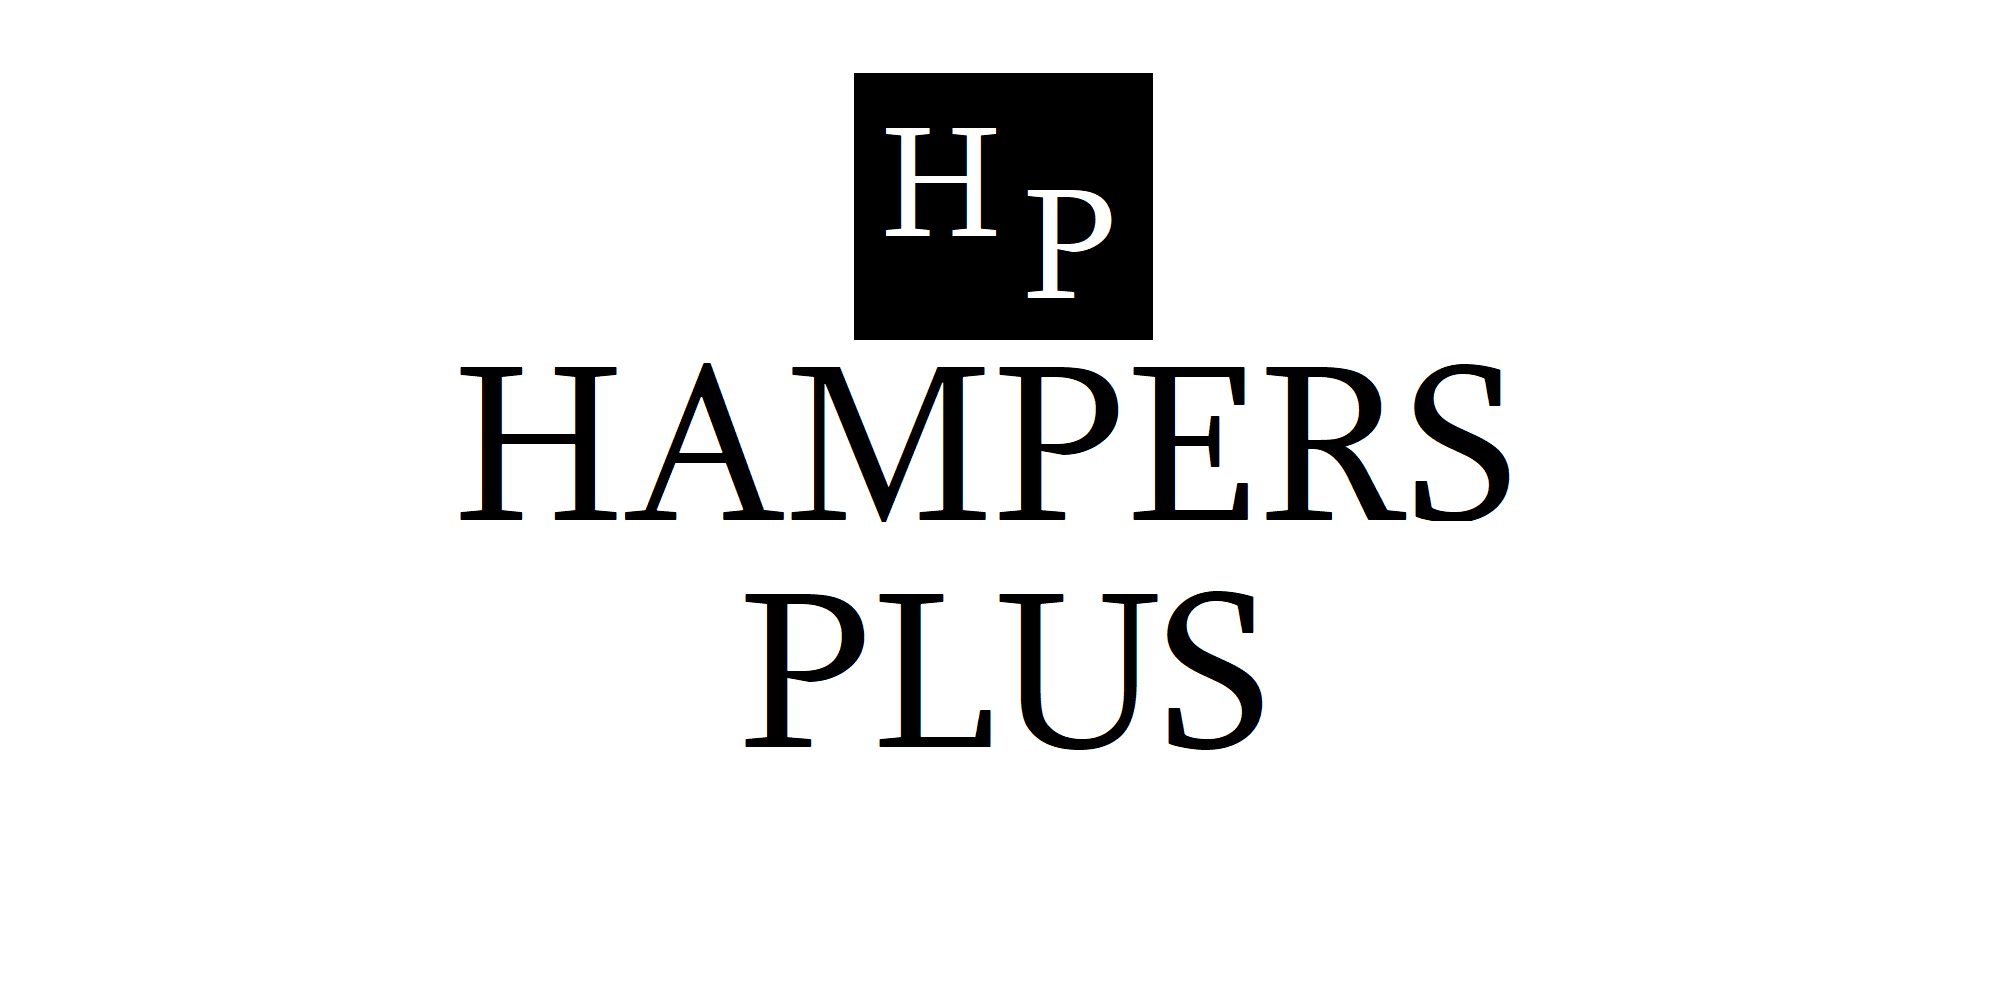 Who we are – Hampers Plus